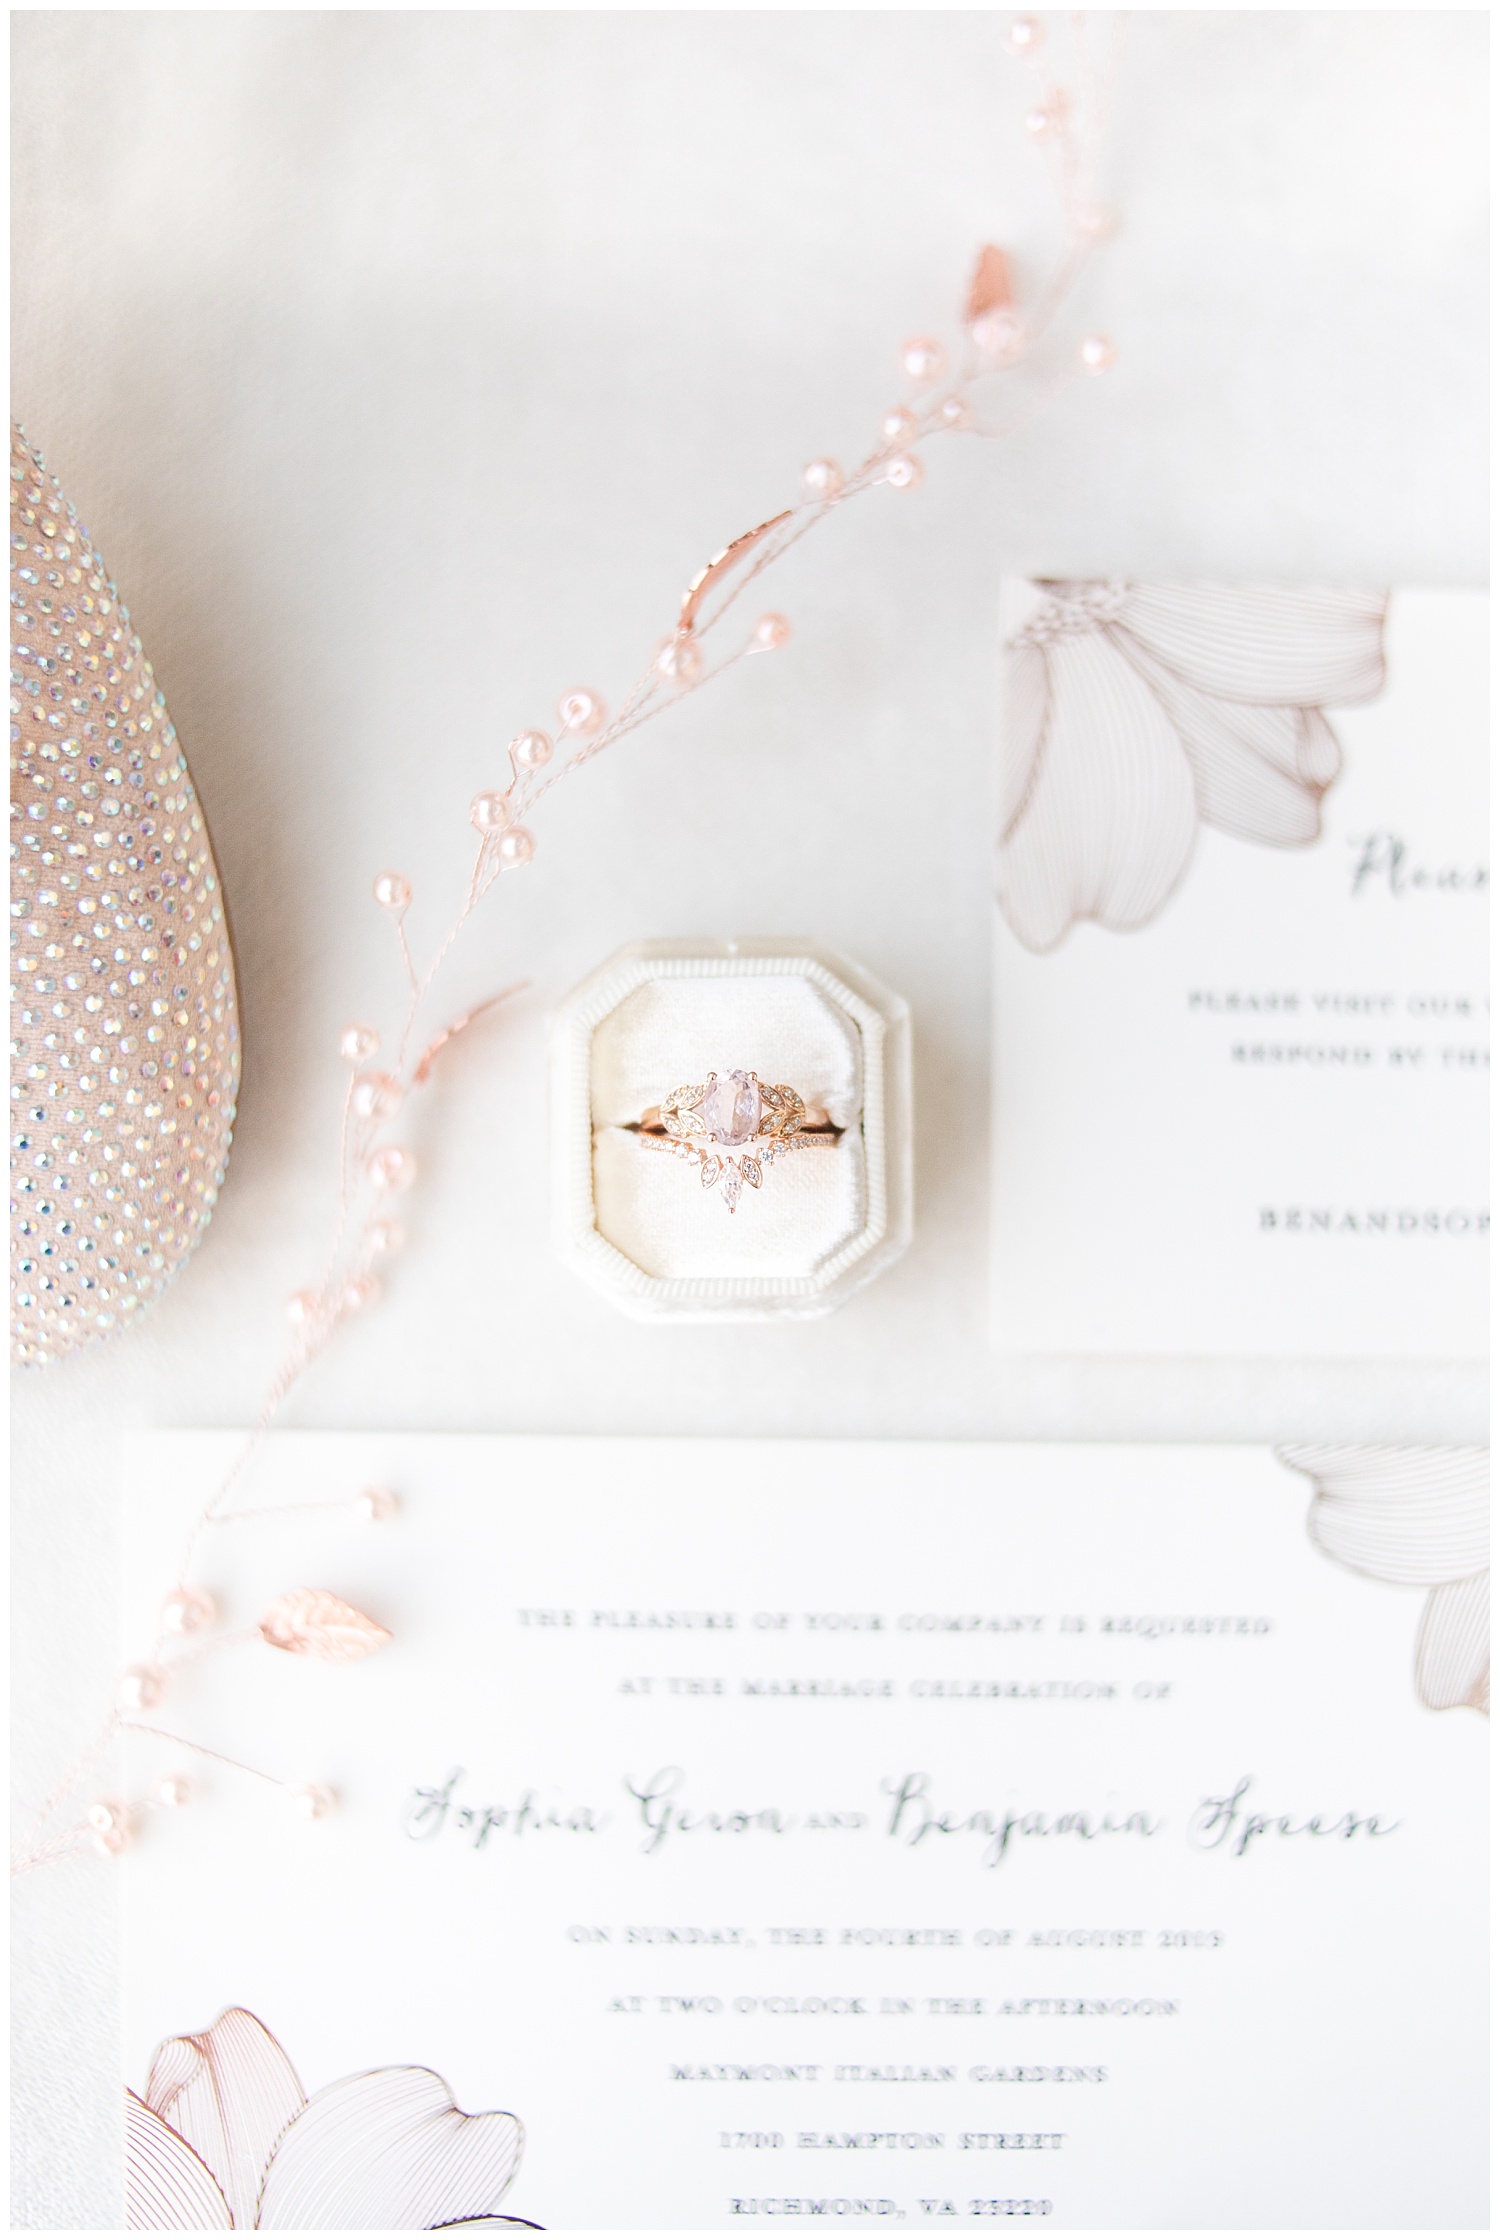 Okay but how gorgeous is Sophia’s engagement ring and band?! Easily one of the prettiest rings I’ve photographed EVER.